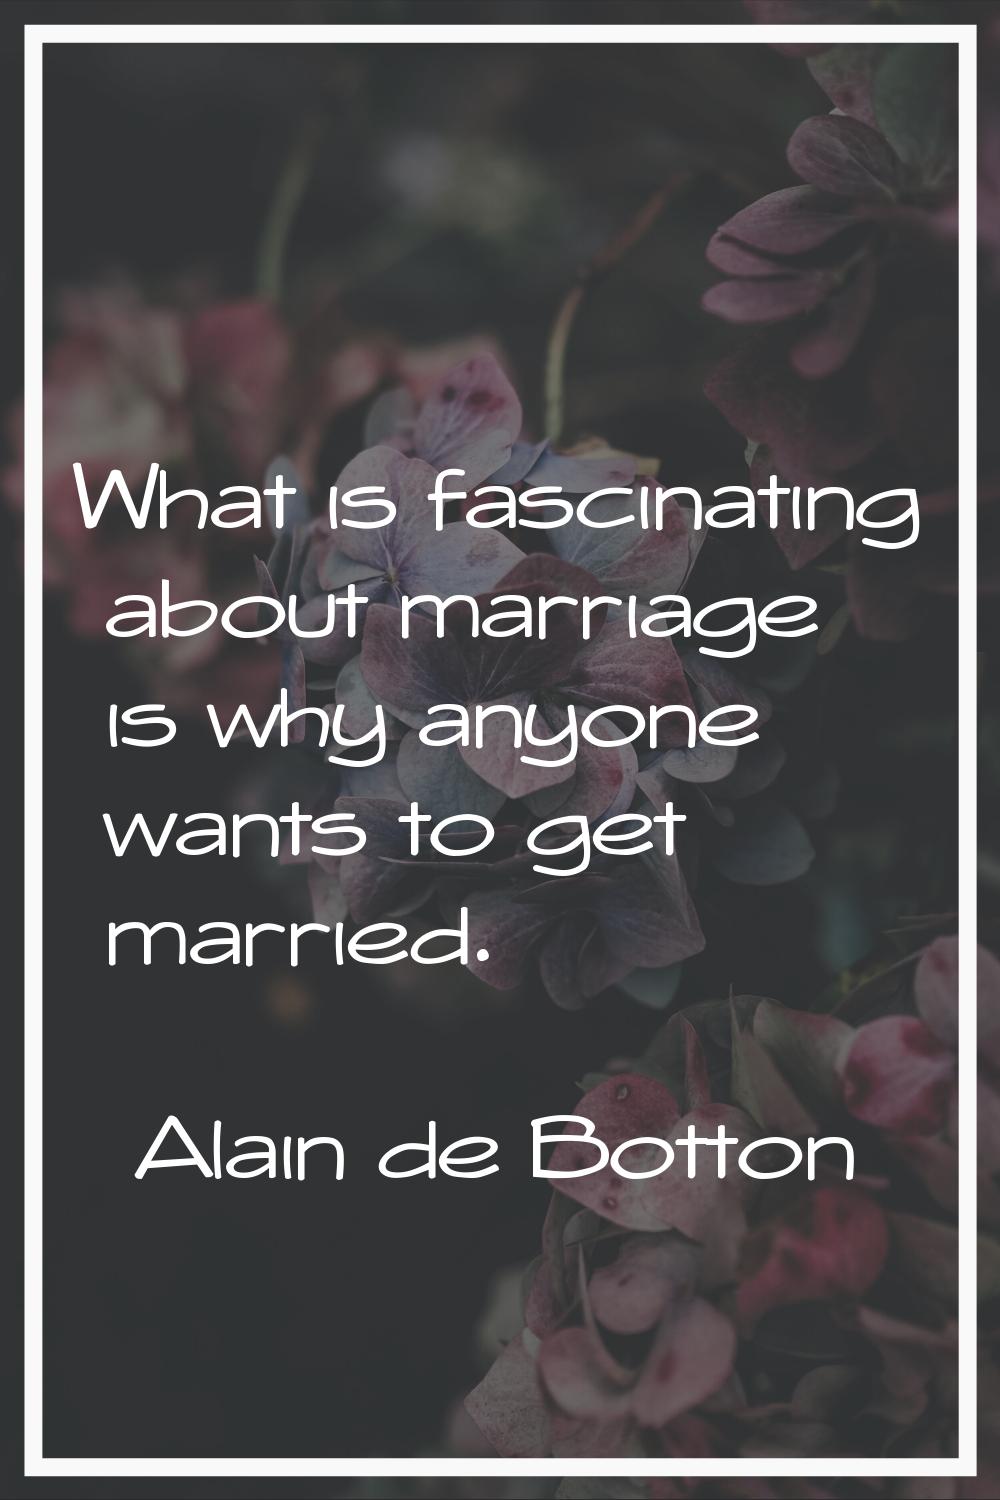 What is fascinating about marriage is why anyone wants to get married.